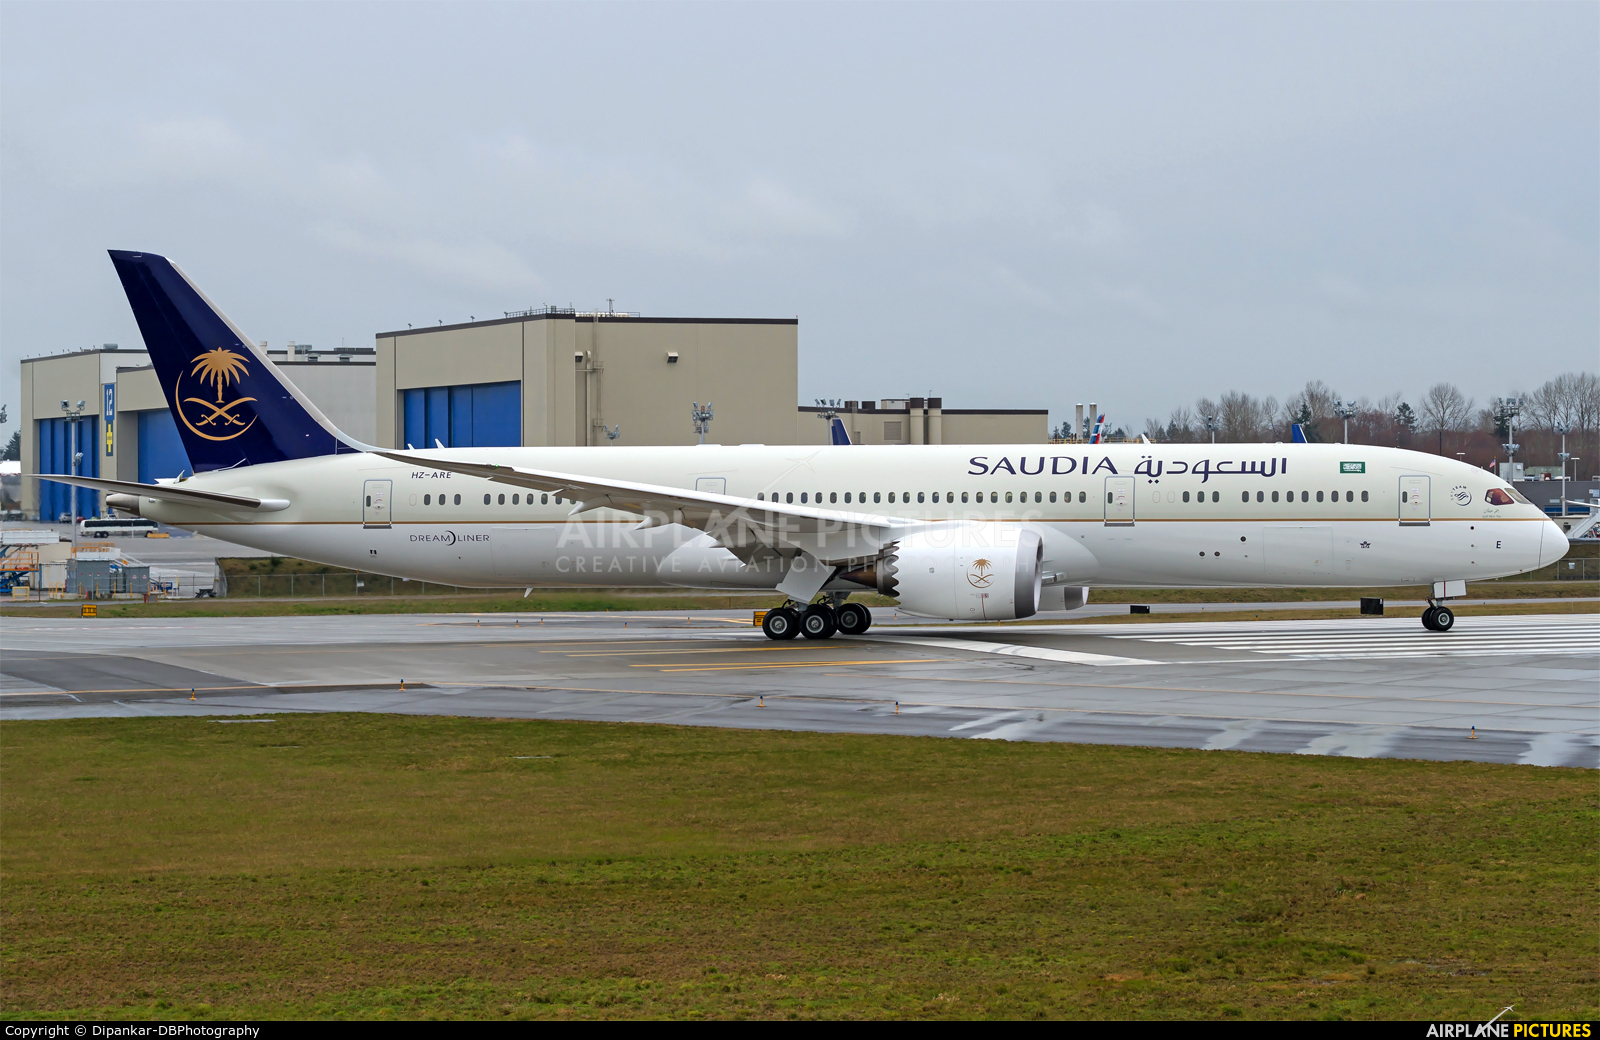 Saudi Arabian Airlines HZ-ARE aircraft at Everett - Snohomish County / Paine Field